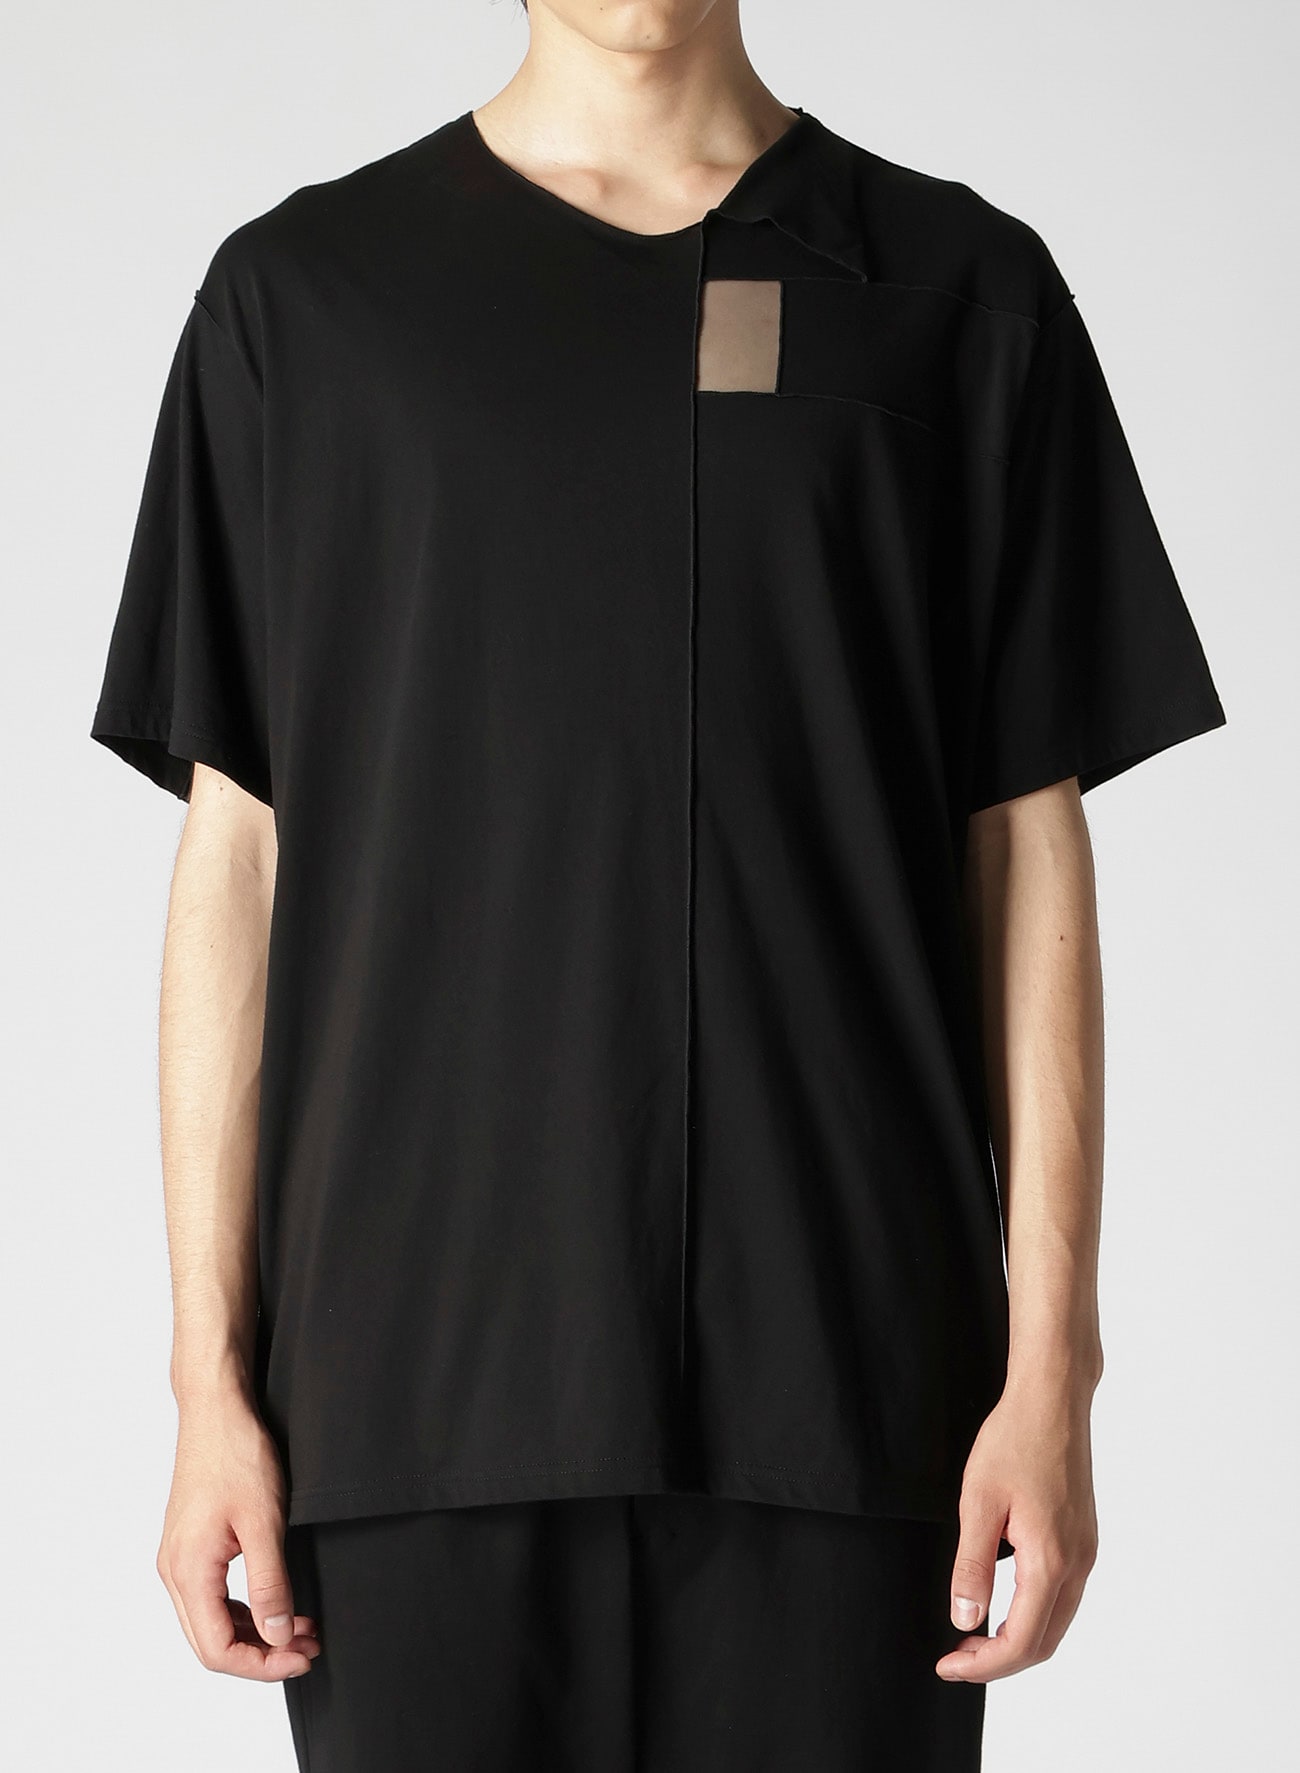 30/-PATCHWORK JERSEY SHEER SWITCH SHORT SLEEVE T(FREE SIZE Black 